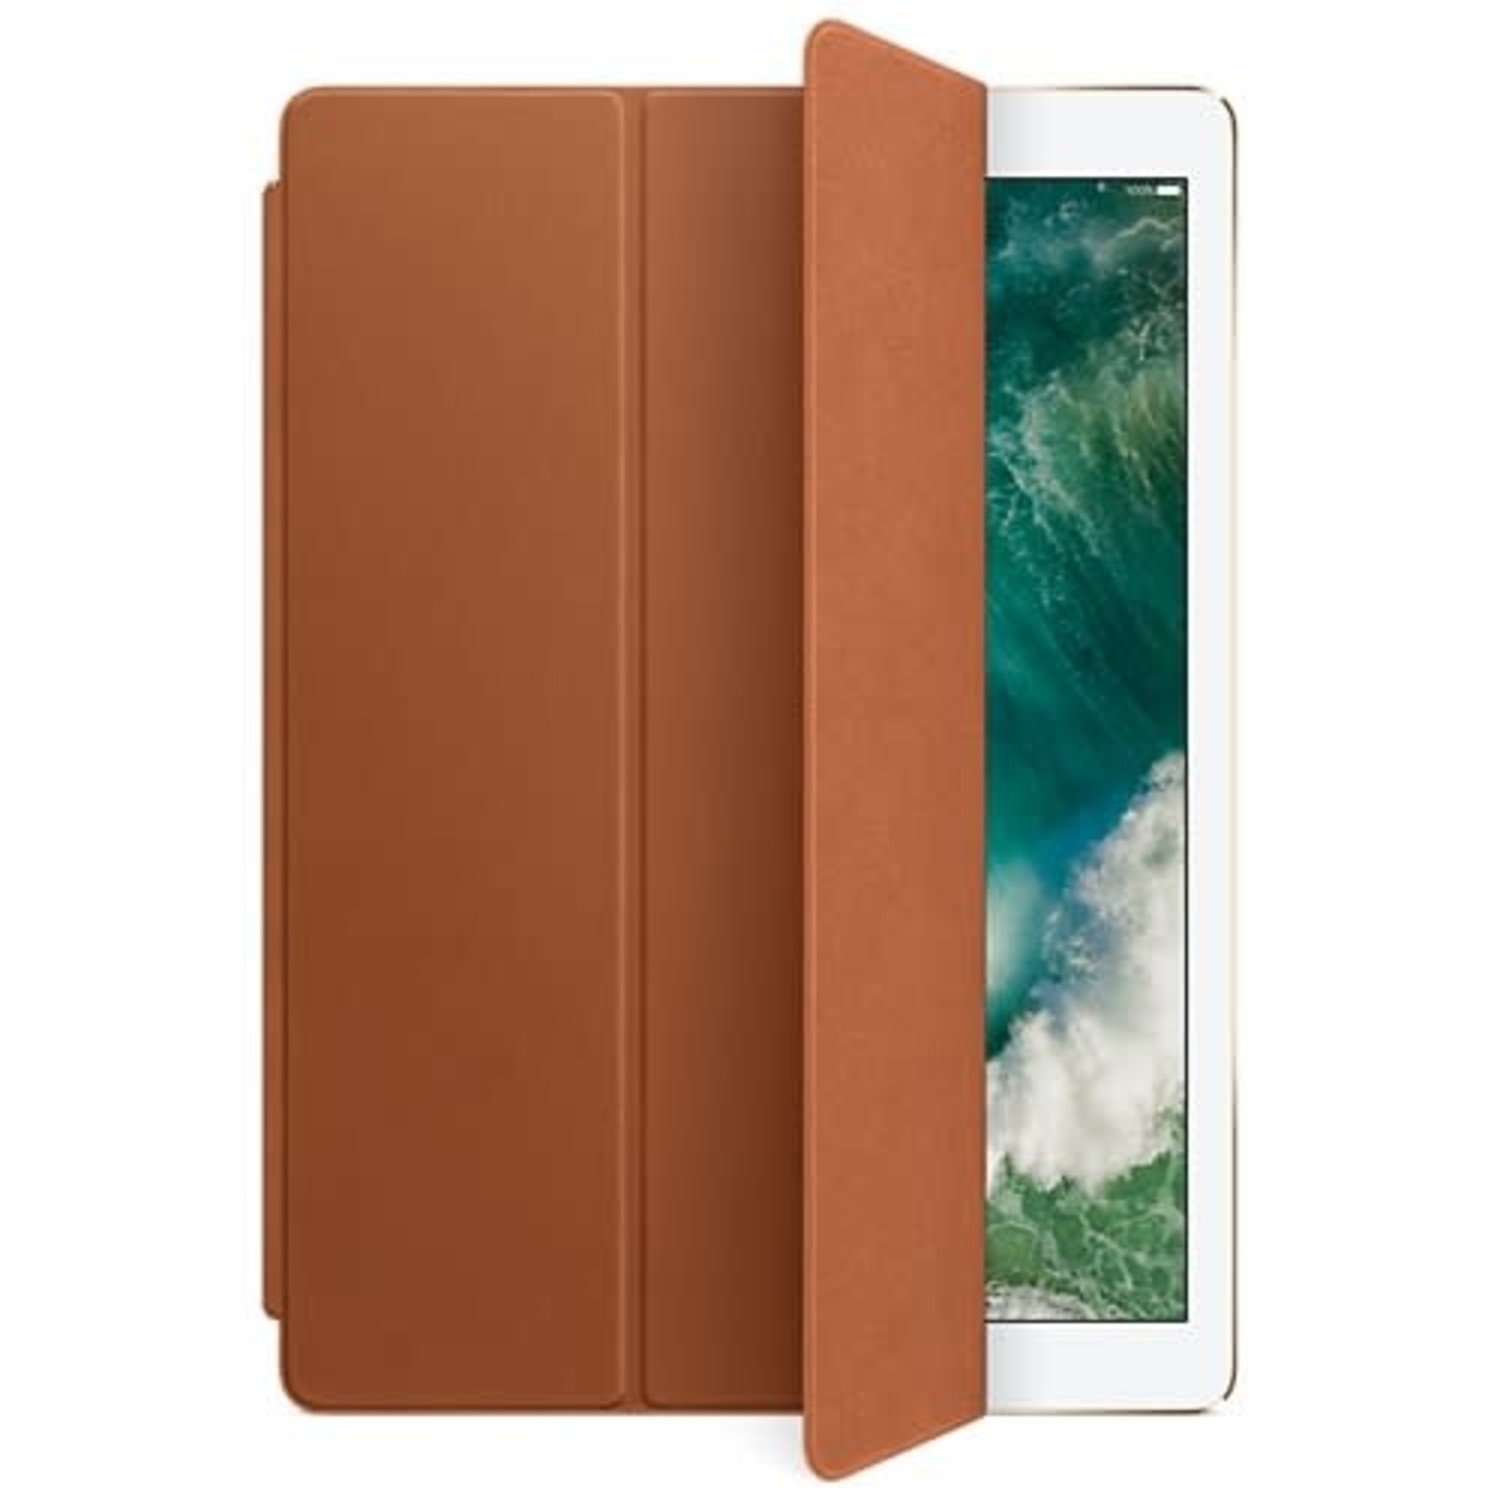 Leather Smart Cover for 12.9-inch iPad Pro - Saddle Brown - EOL [OPEN BOX]  - kite+key, Rutgers Tech Store